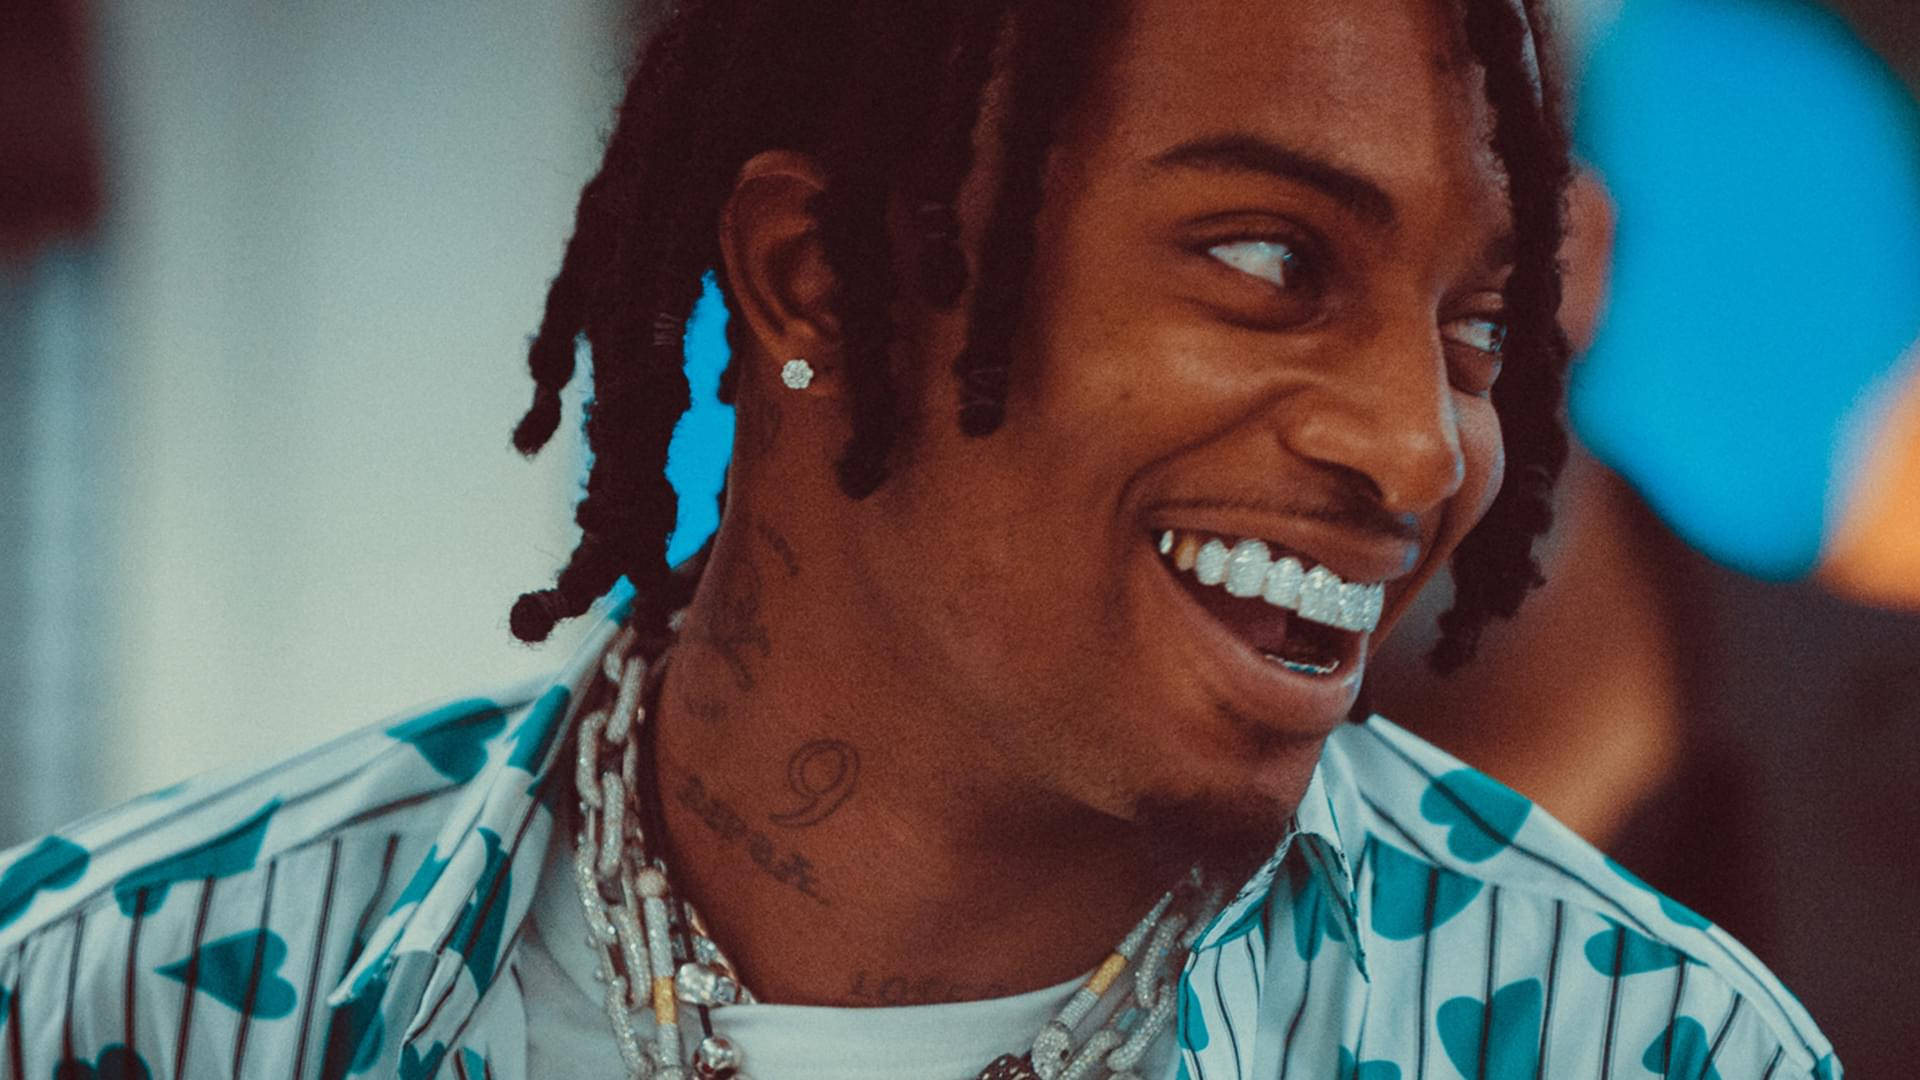 Playboi Carti Smiling Widely Background